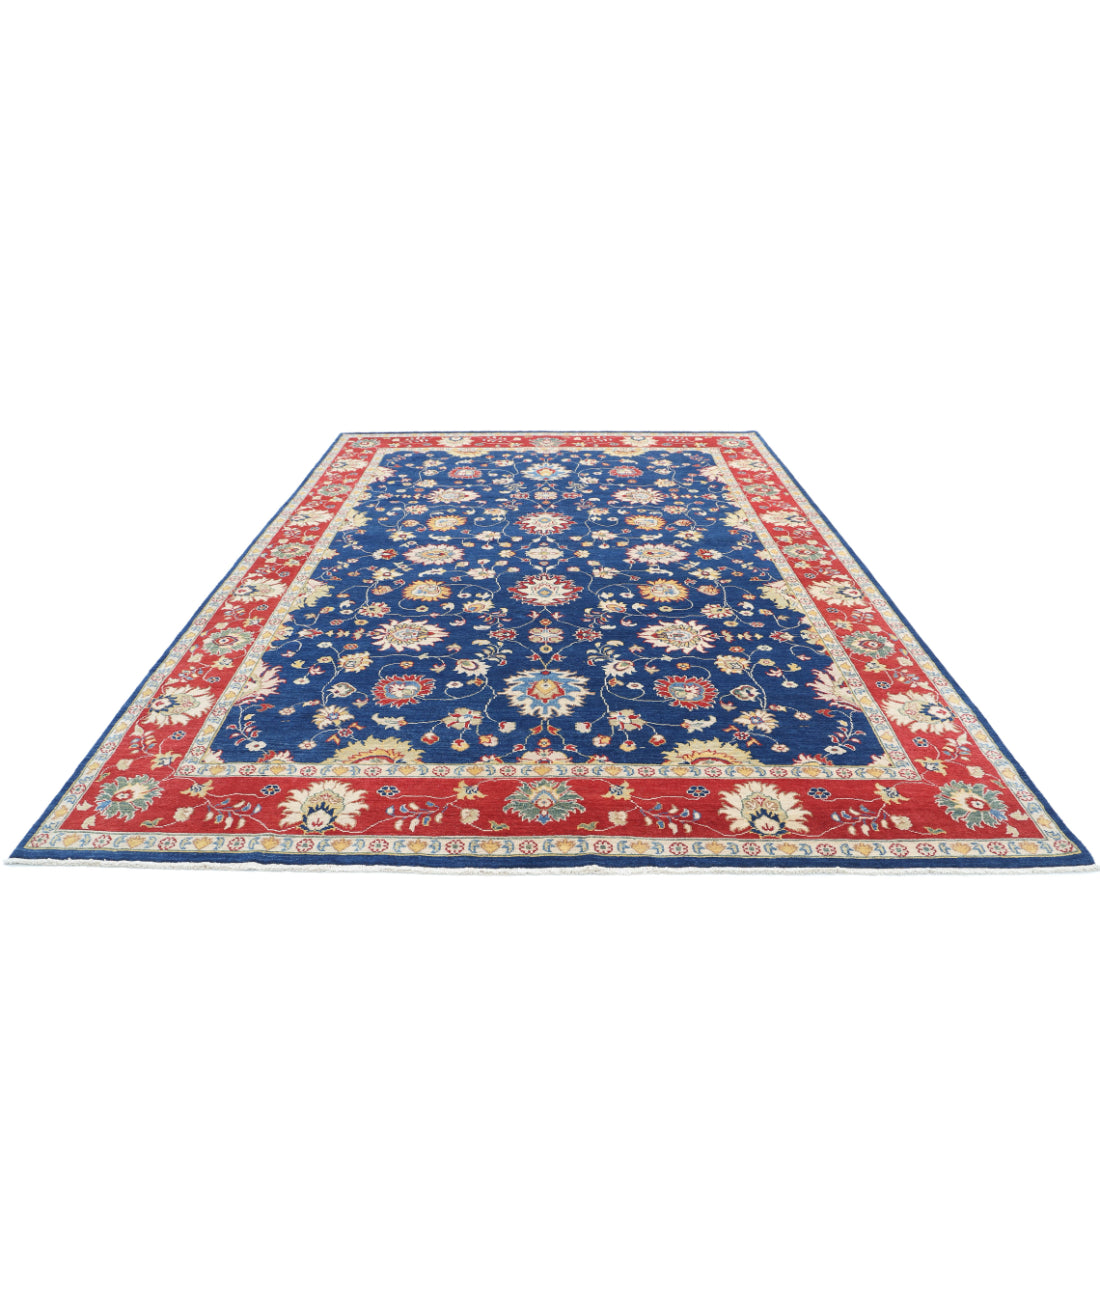 Ziegler 8'10'' X 12'3'' Hand-Knotted Wool Rug 8'10'' x 12'3'' (265 X 368) / Blue / Red